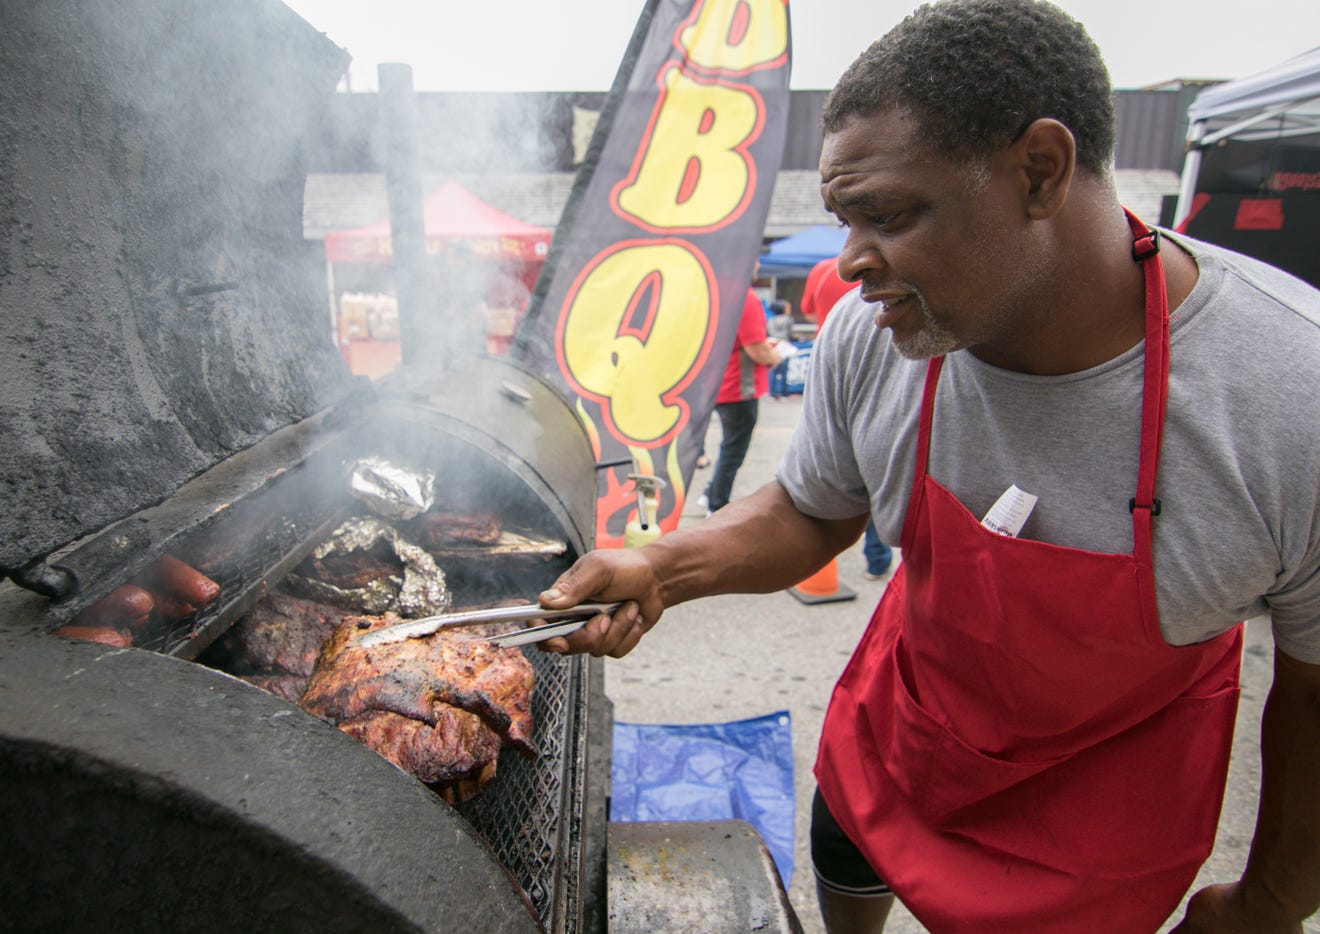 Barbecue, music fills air in downtown Brighton at festival